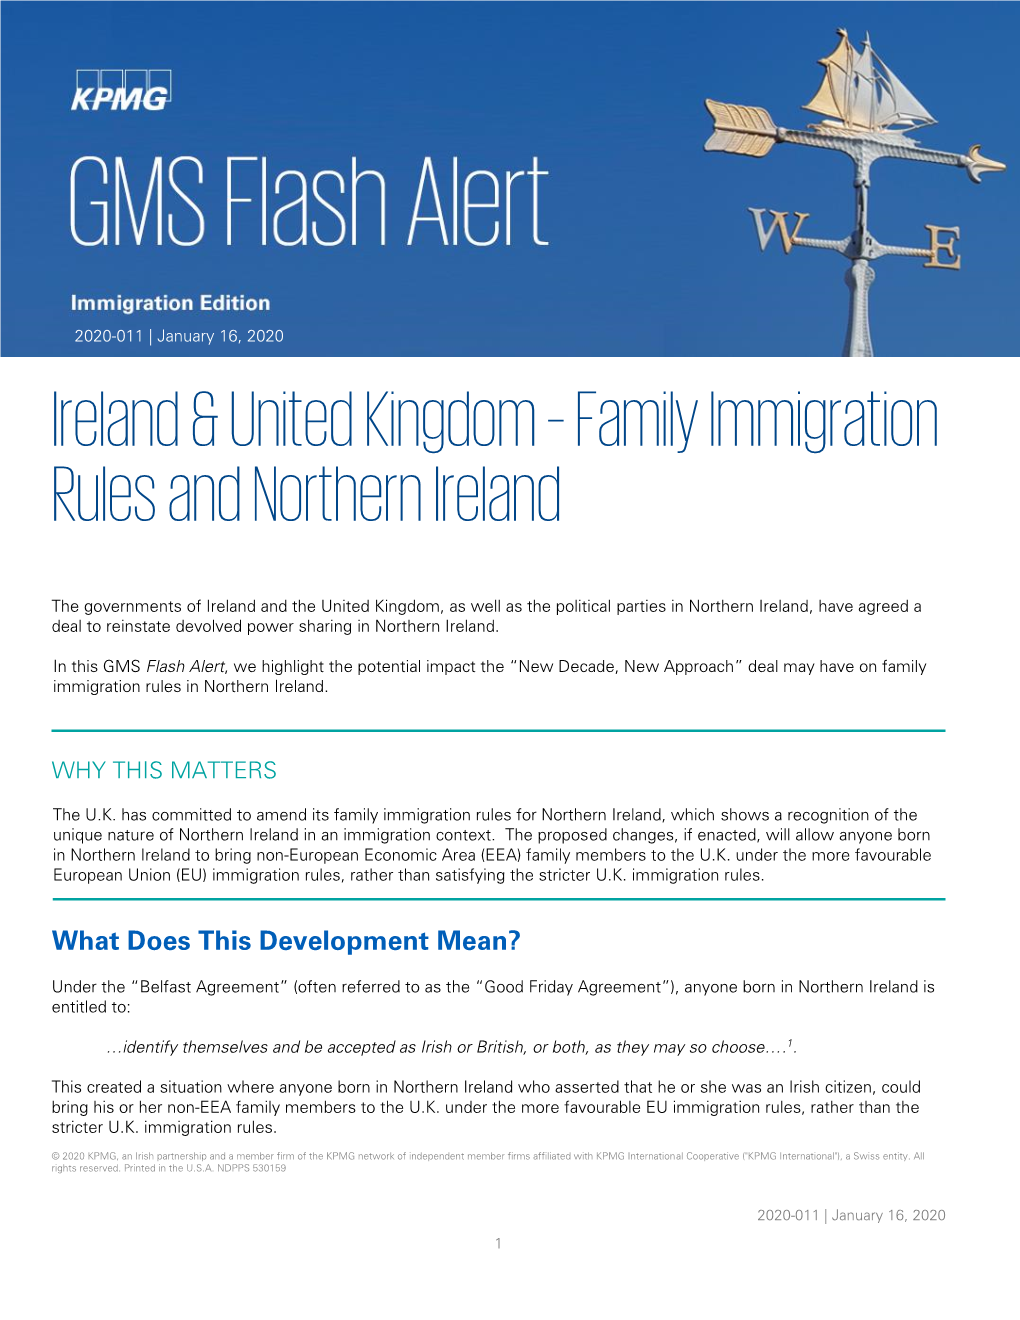 Family Immigration Rules and Northern Ireland